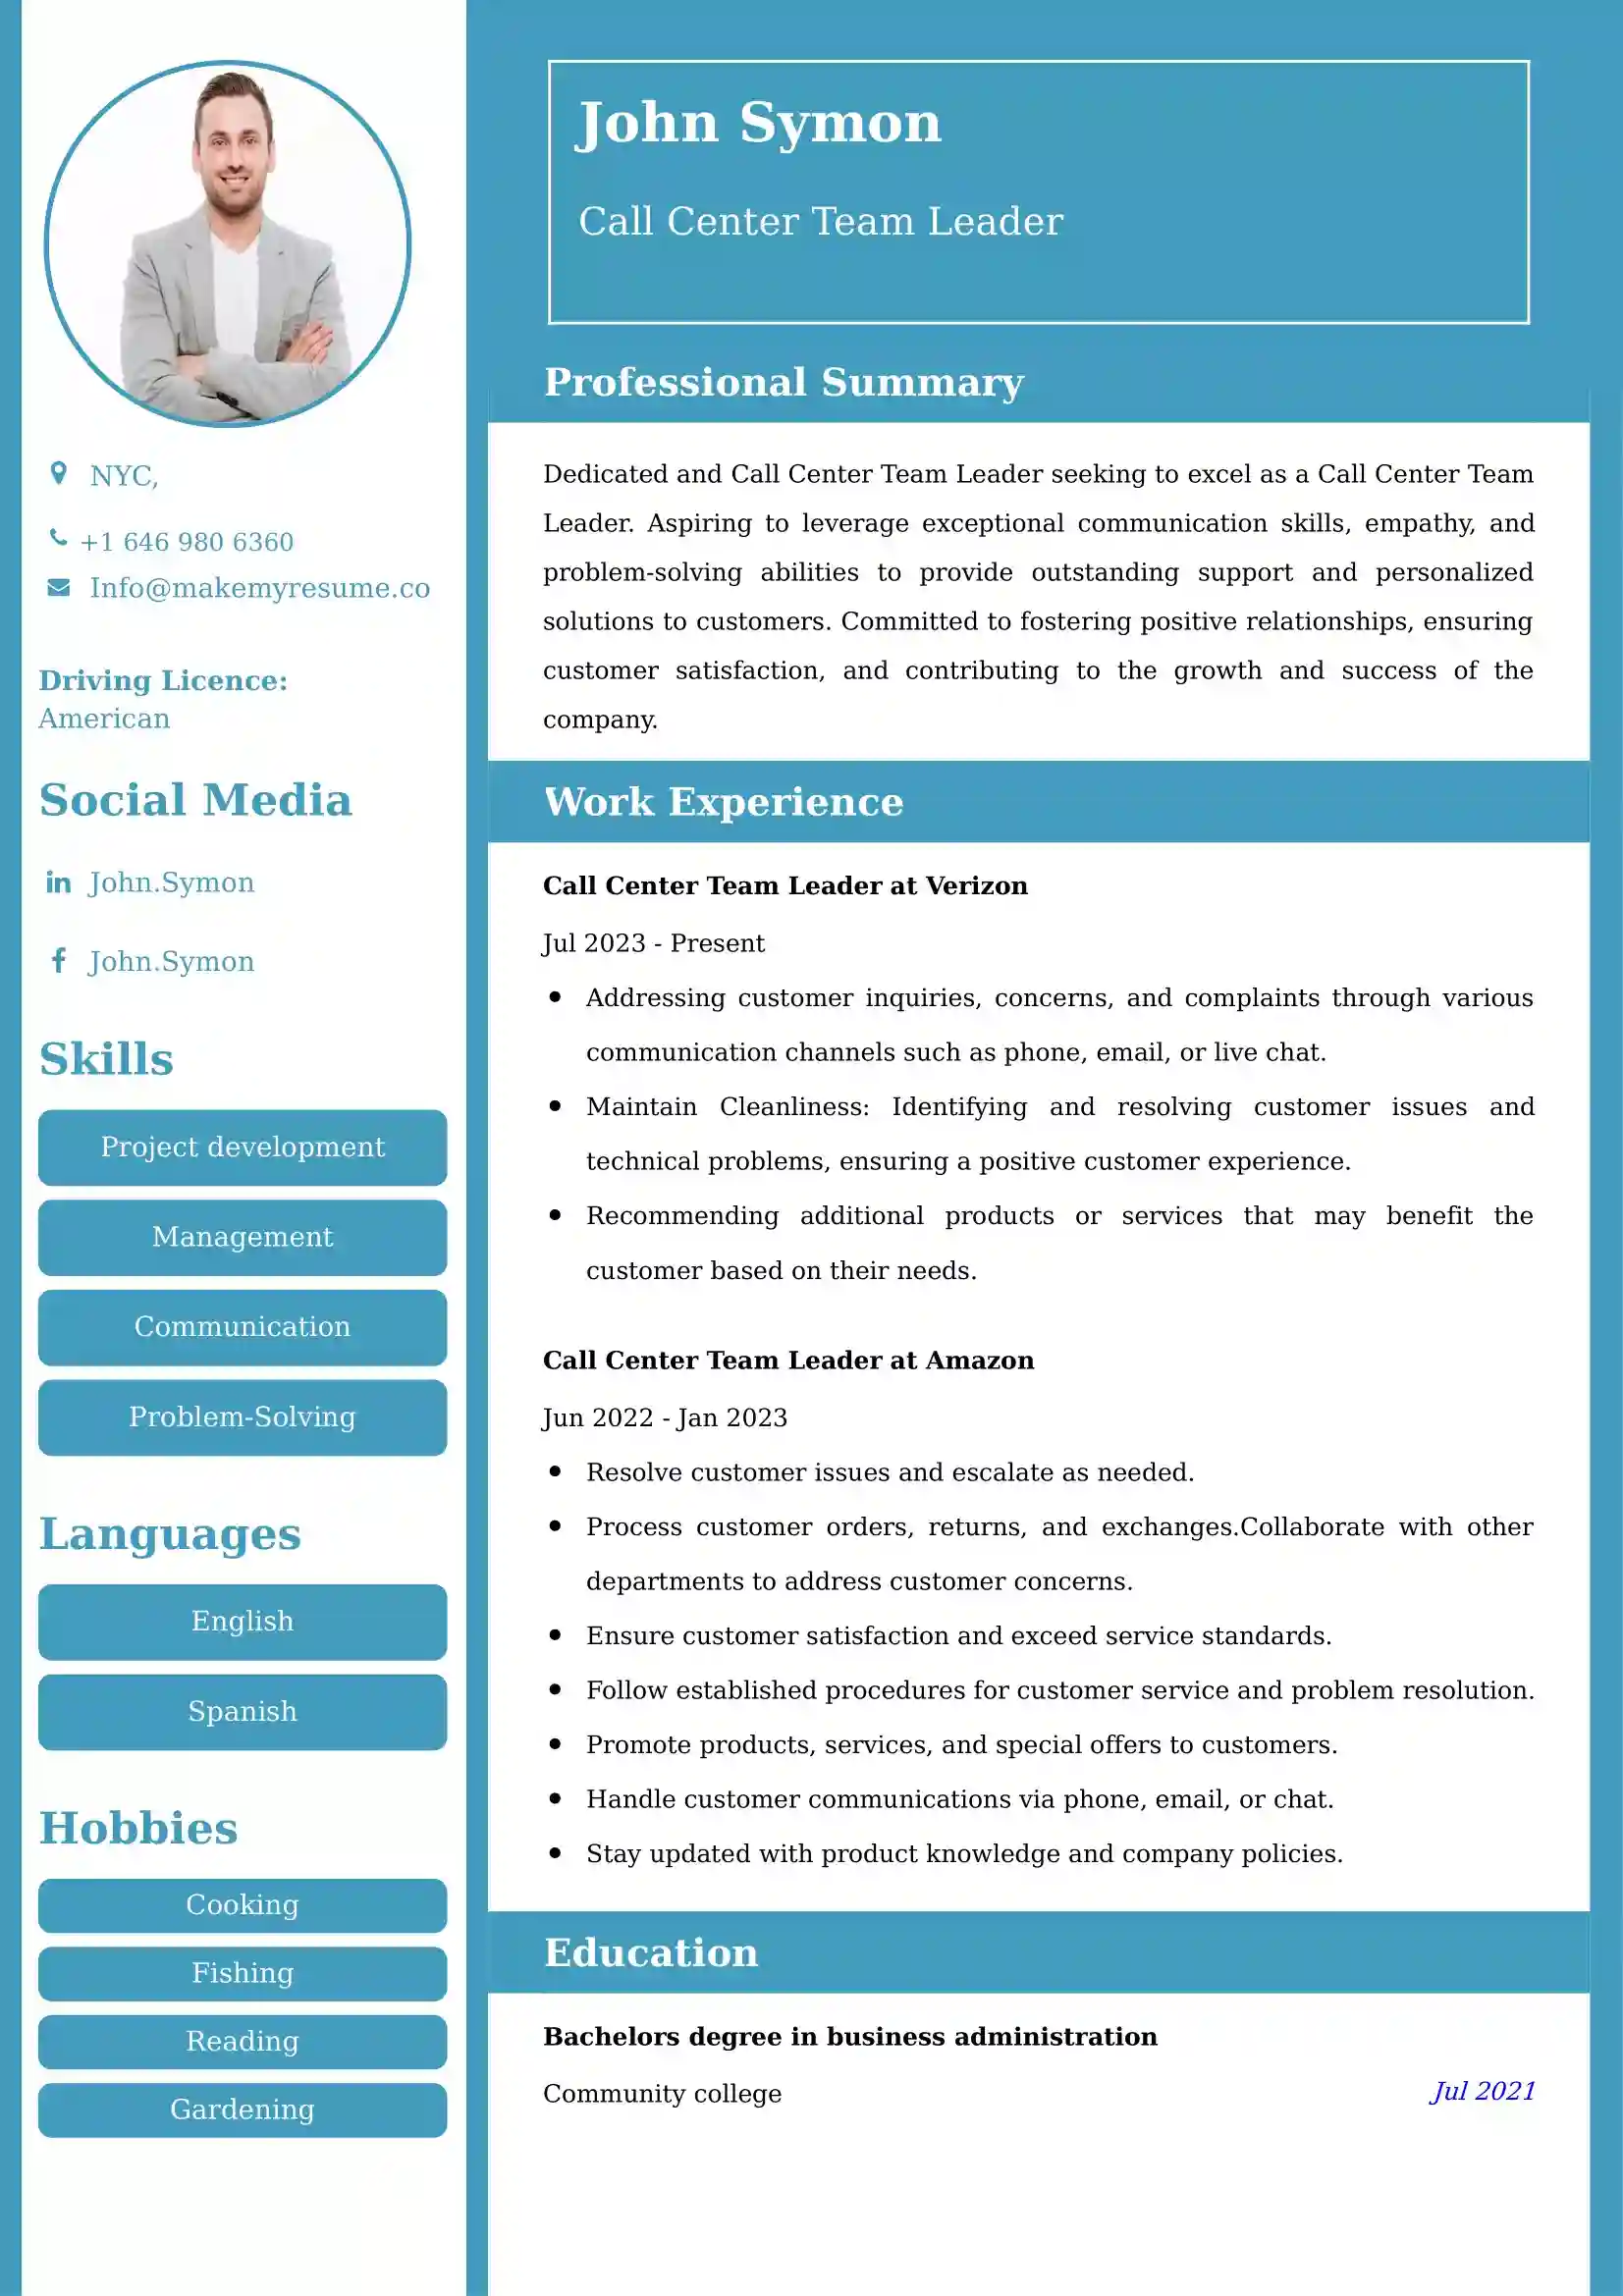 Call Center Team Leader Resume Examples - Australian Format and Tips